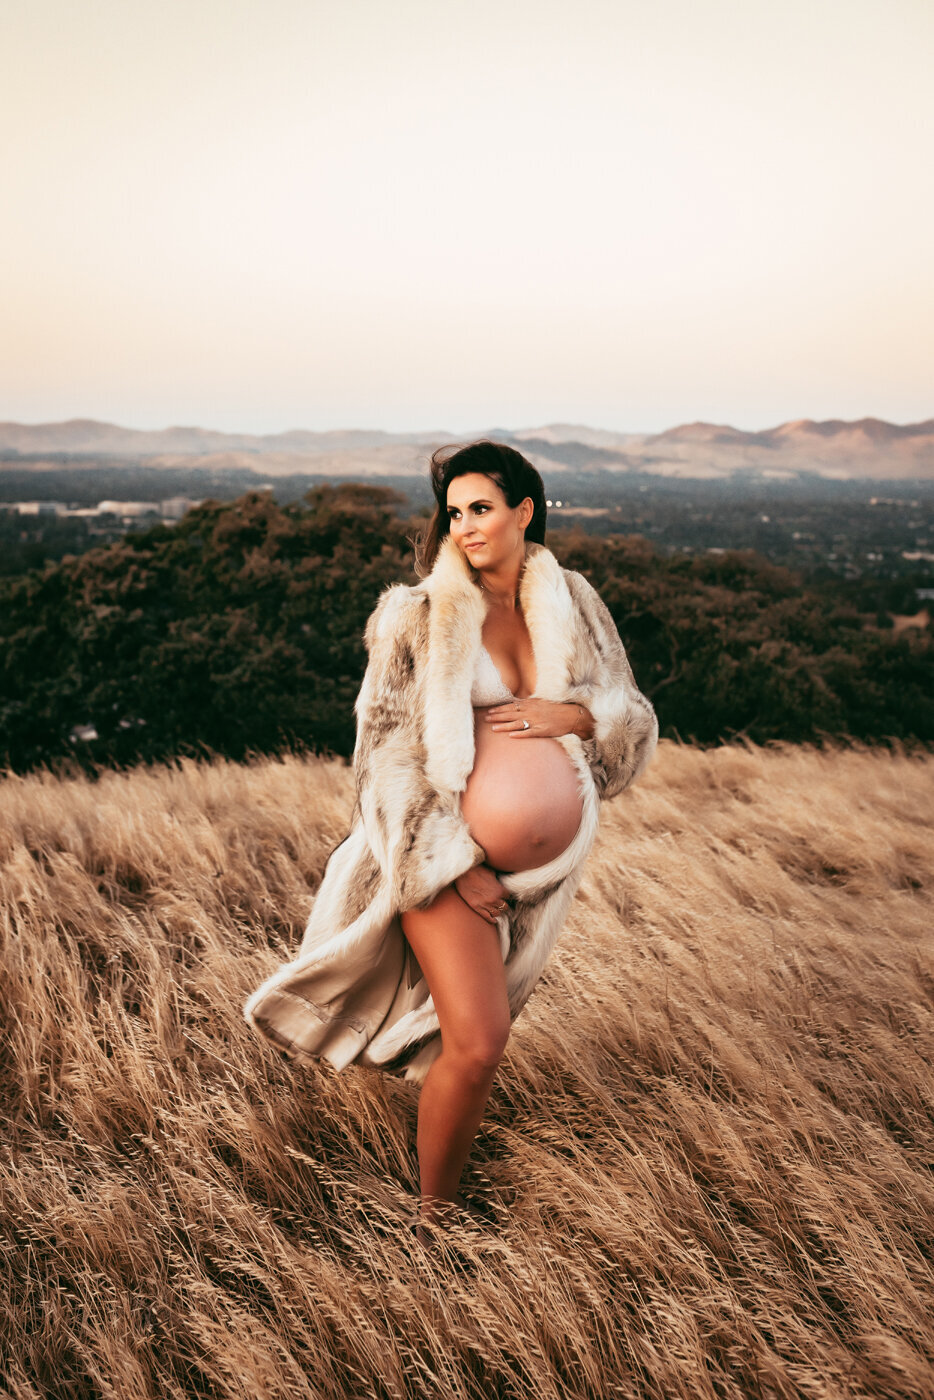 Maternity session with mama wearing a fur coat and showing her baby bump